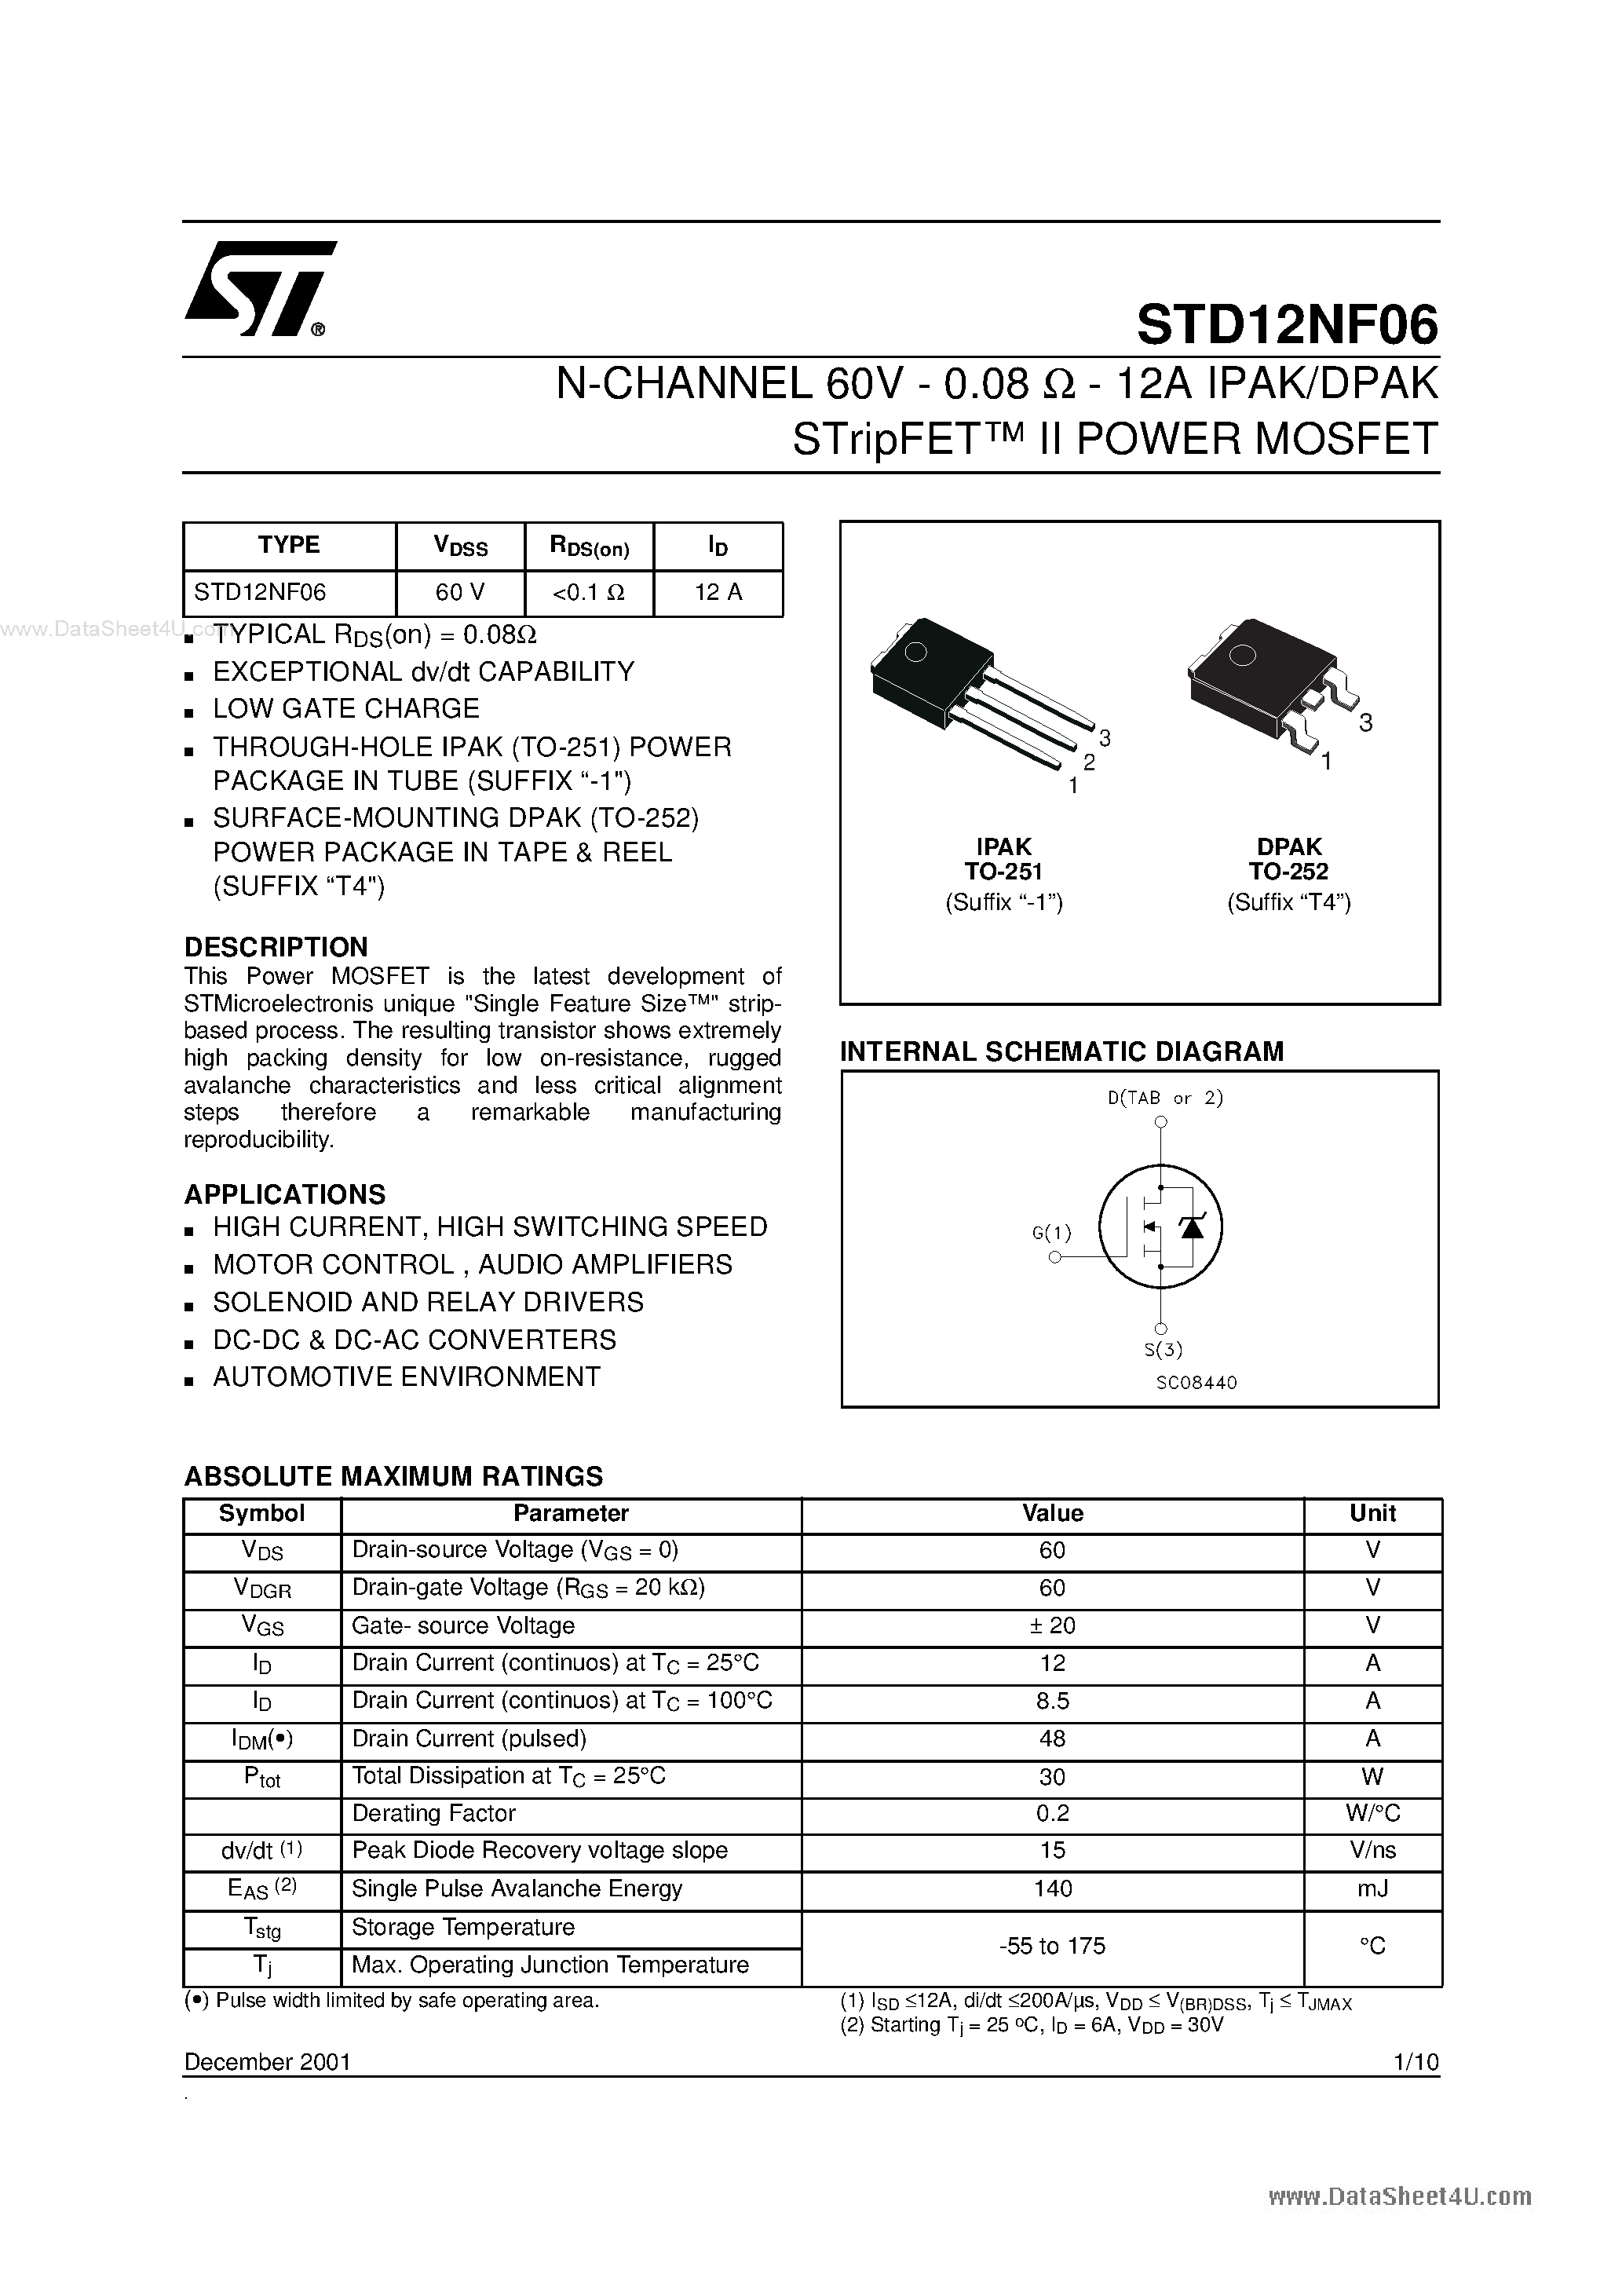 Datasheet D12NF06 - Search -----> STD12NF06 page 1